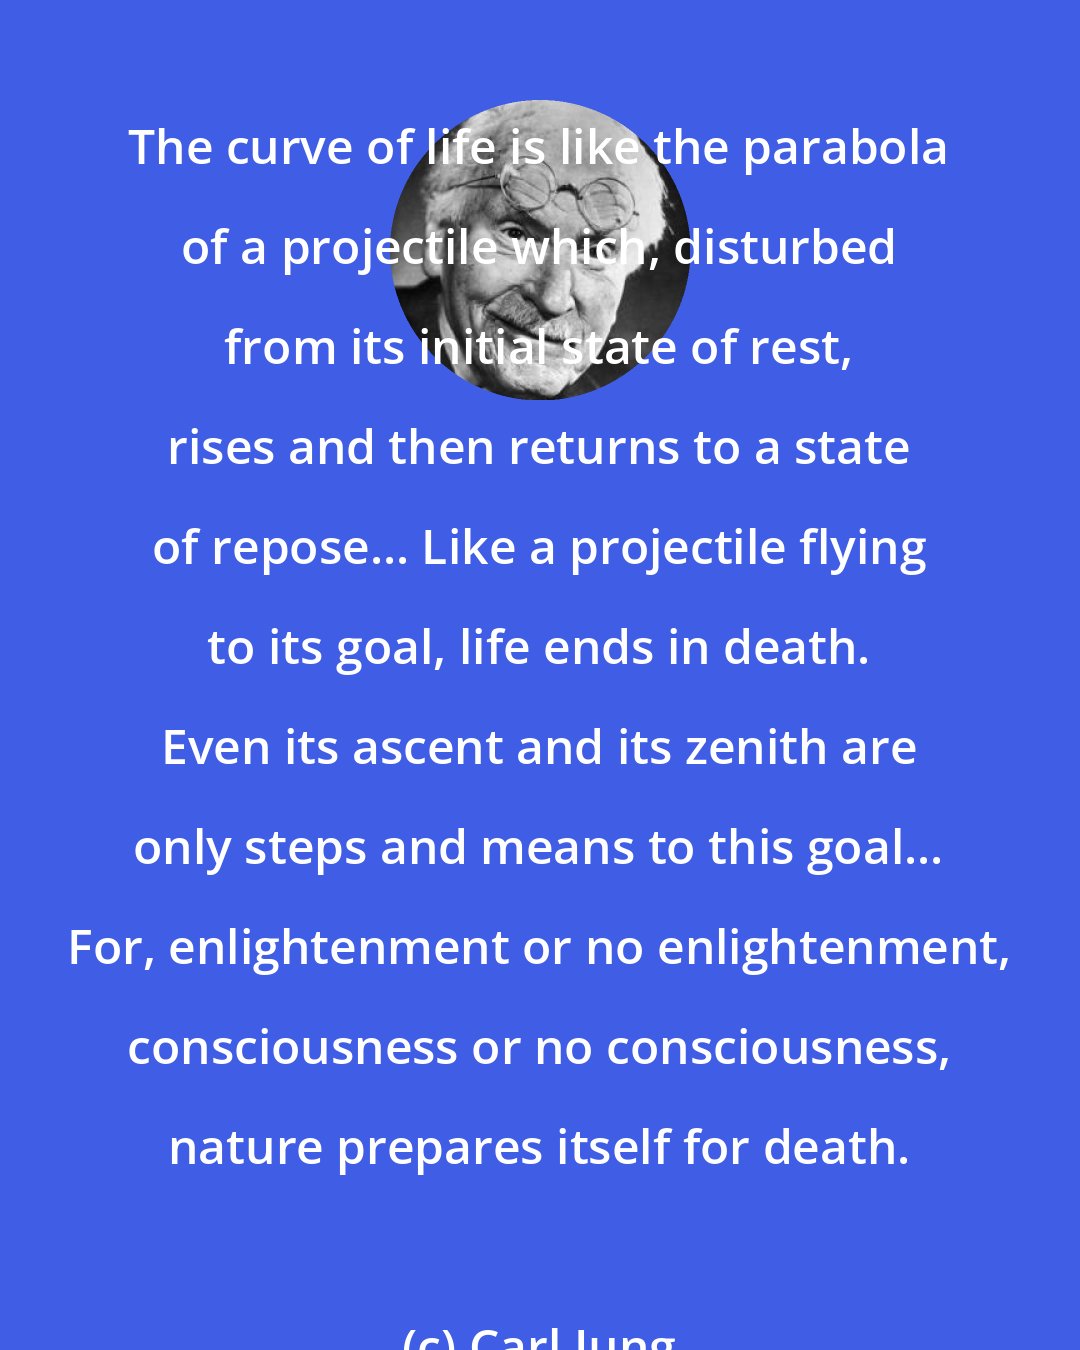 Carl Jung: The curve of life is like the parabola of a projectile which, disturbed from its initial state of rest, rises and then returns to a state of repose... Like a projectile flying to its goal, life ends in death. Even its ascent and its zenith are only steps and means to this goal... For, enlightenment or no enlightenment, consciousness or no consciousness, nature prepares itself for death.